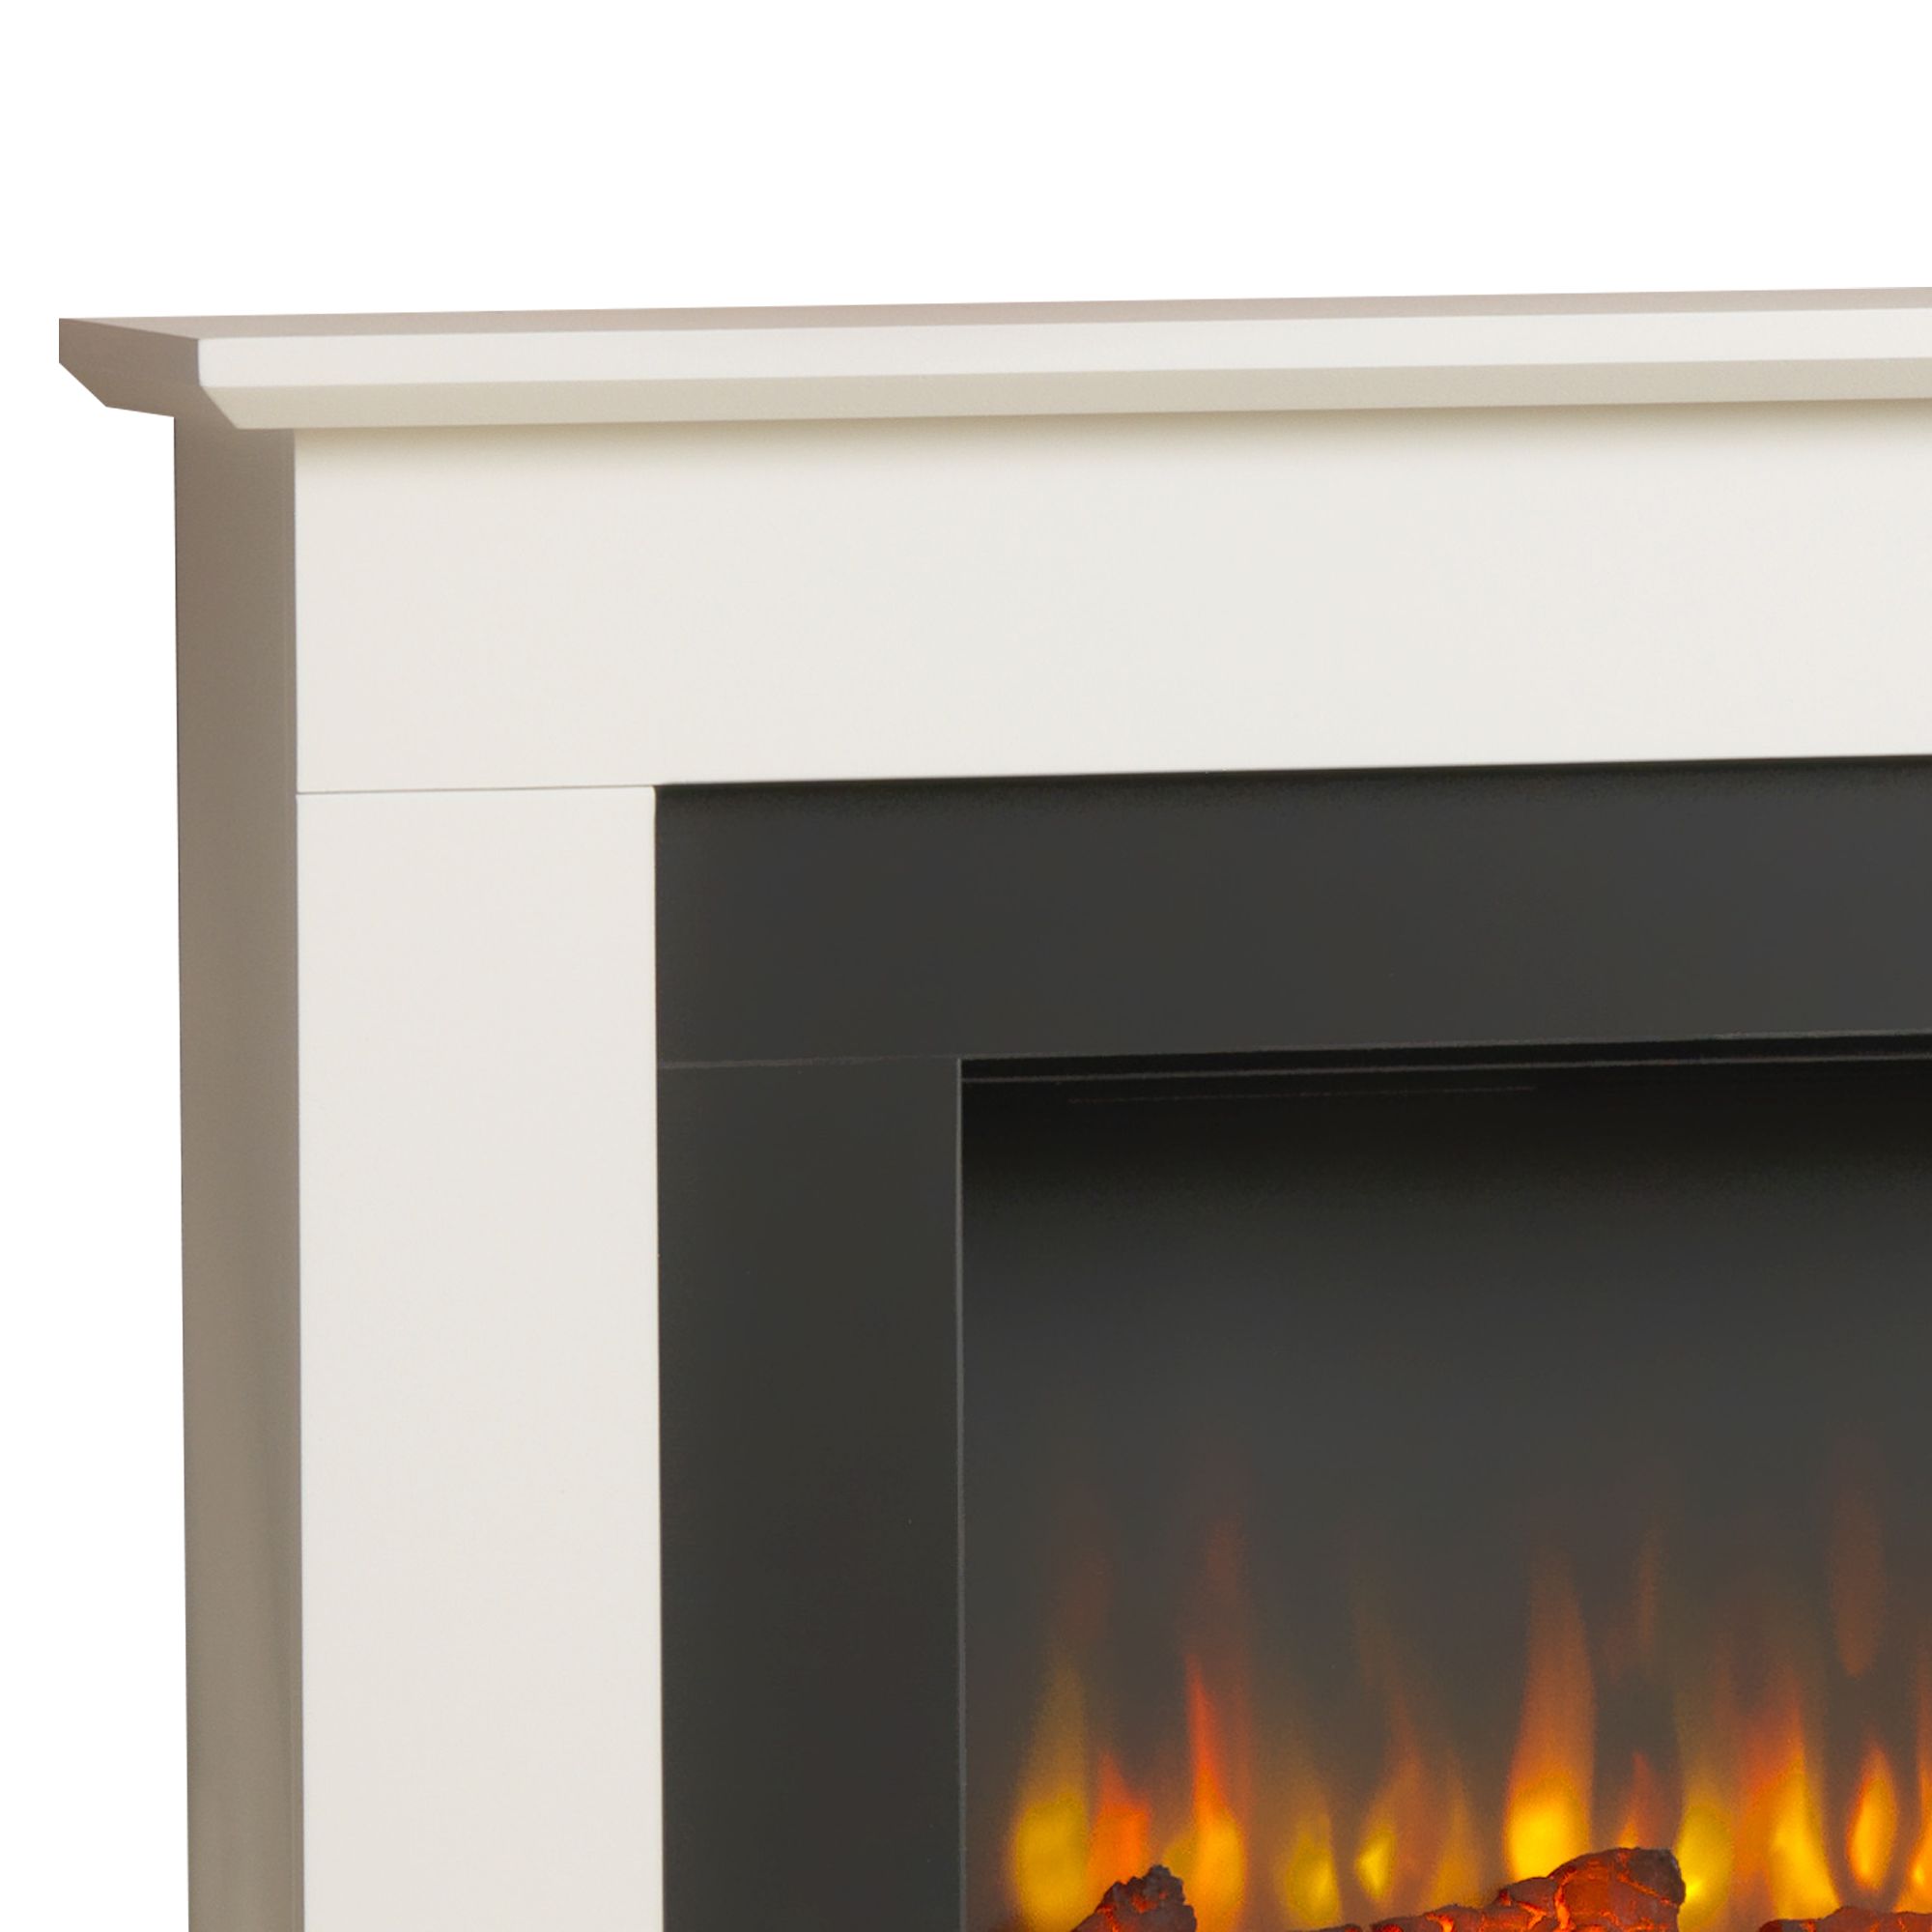 Suncrest Georgia White MDF & stainless steel Freestanding Electric fire suite